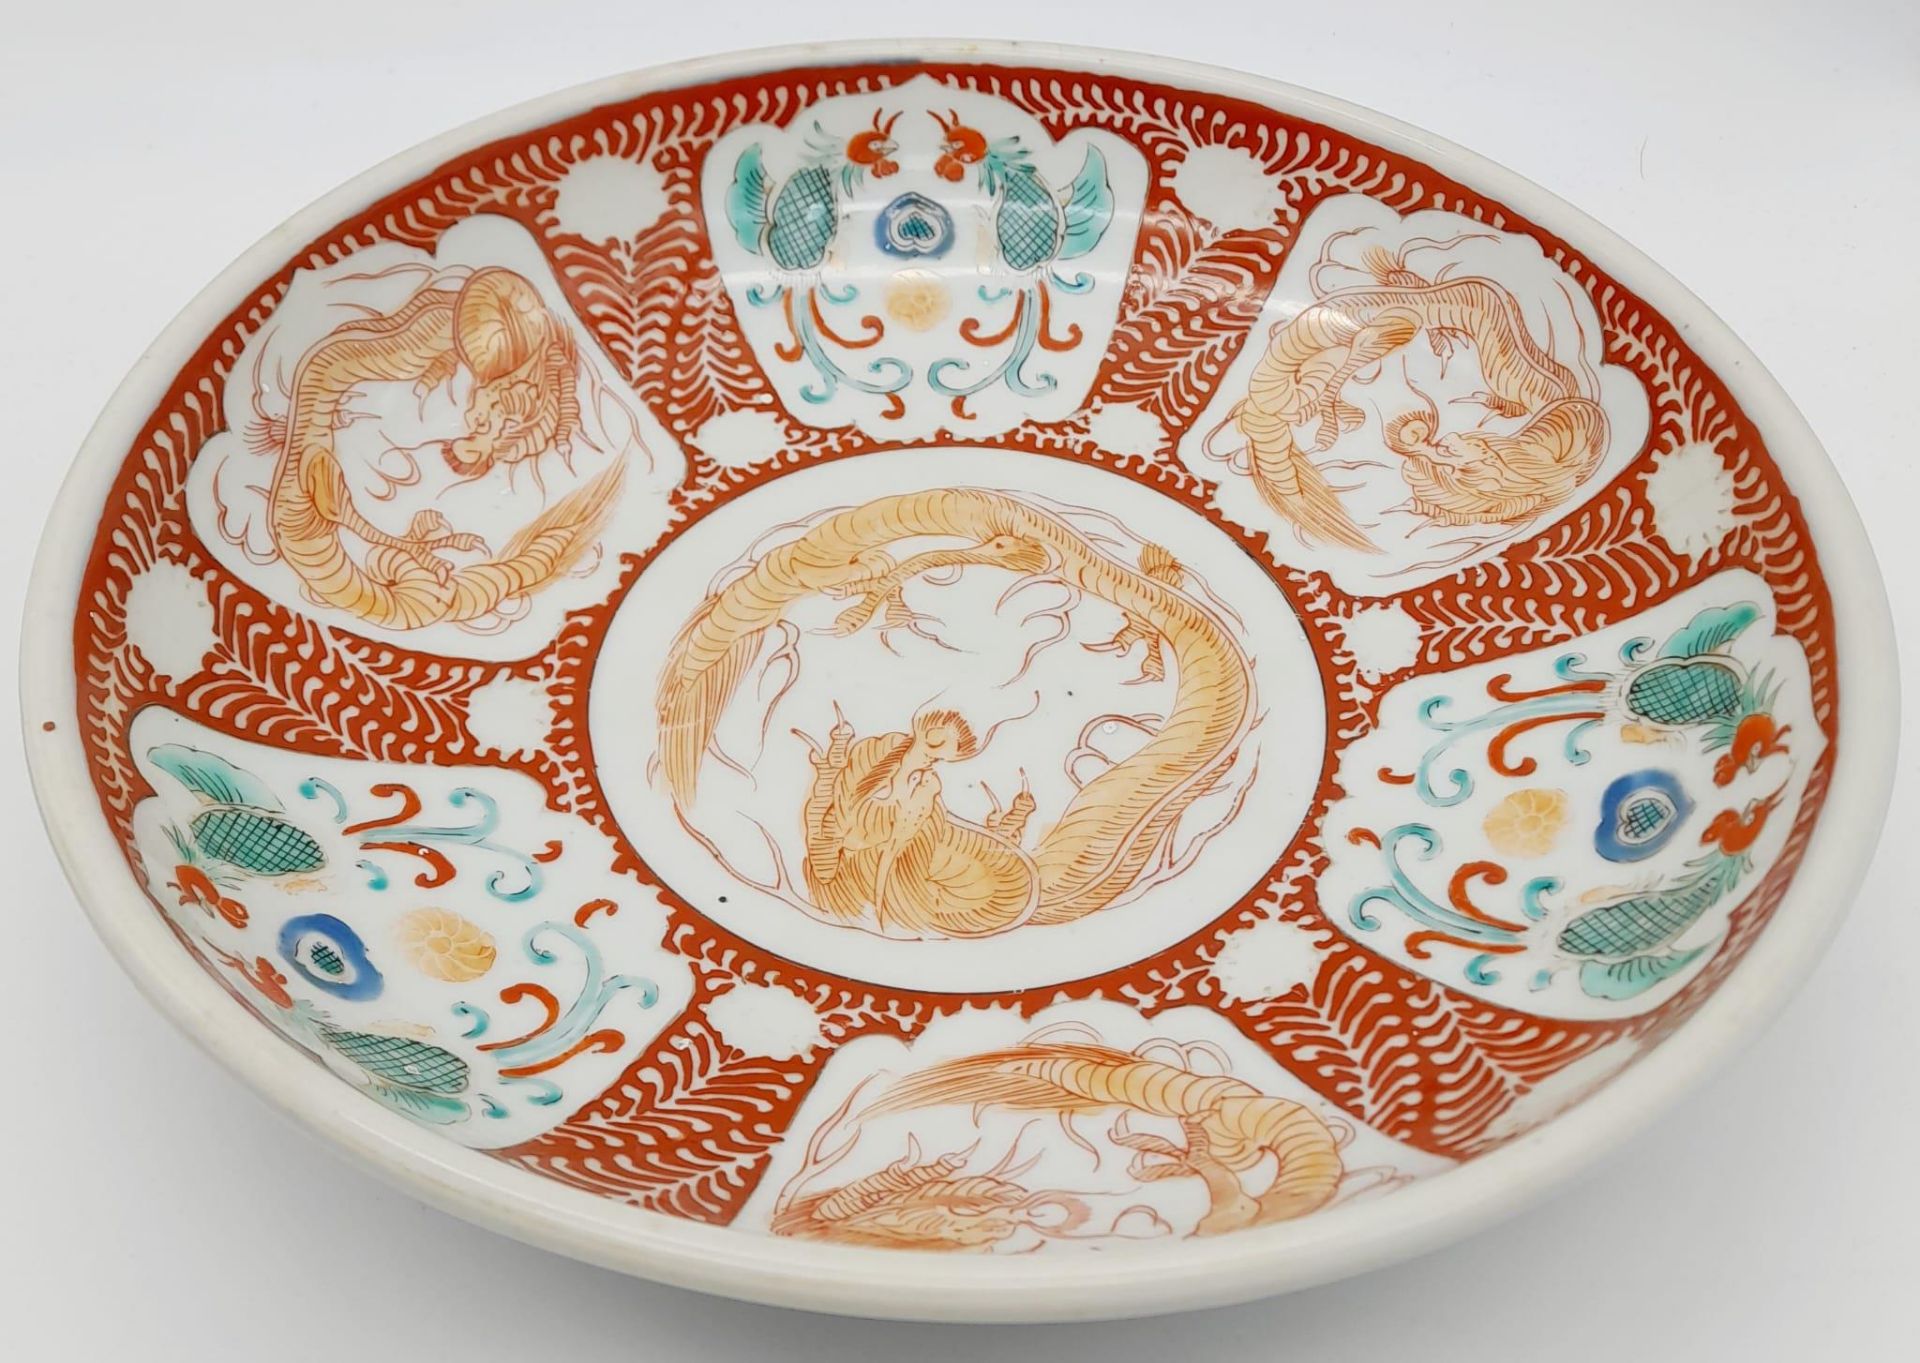 A Large Antique Chinese Famille Rose Bowl. Wonderful colours and decoration depicting dragons and